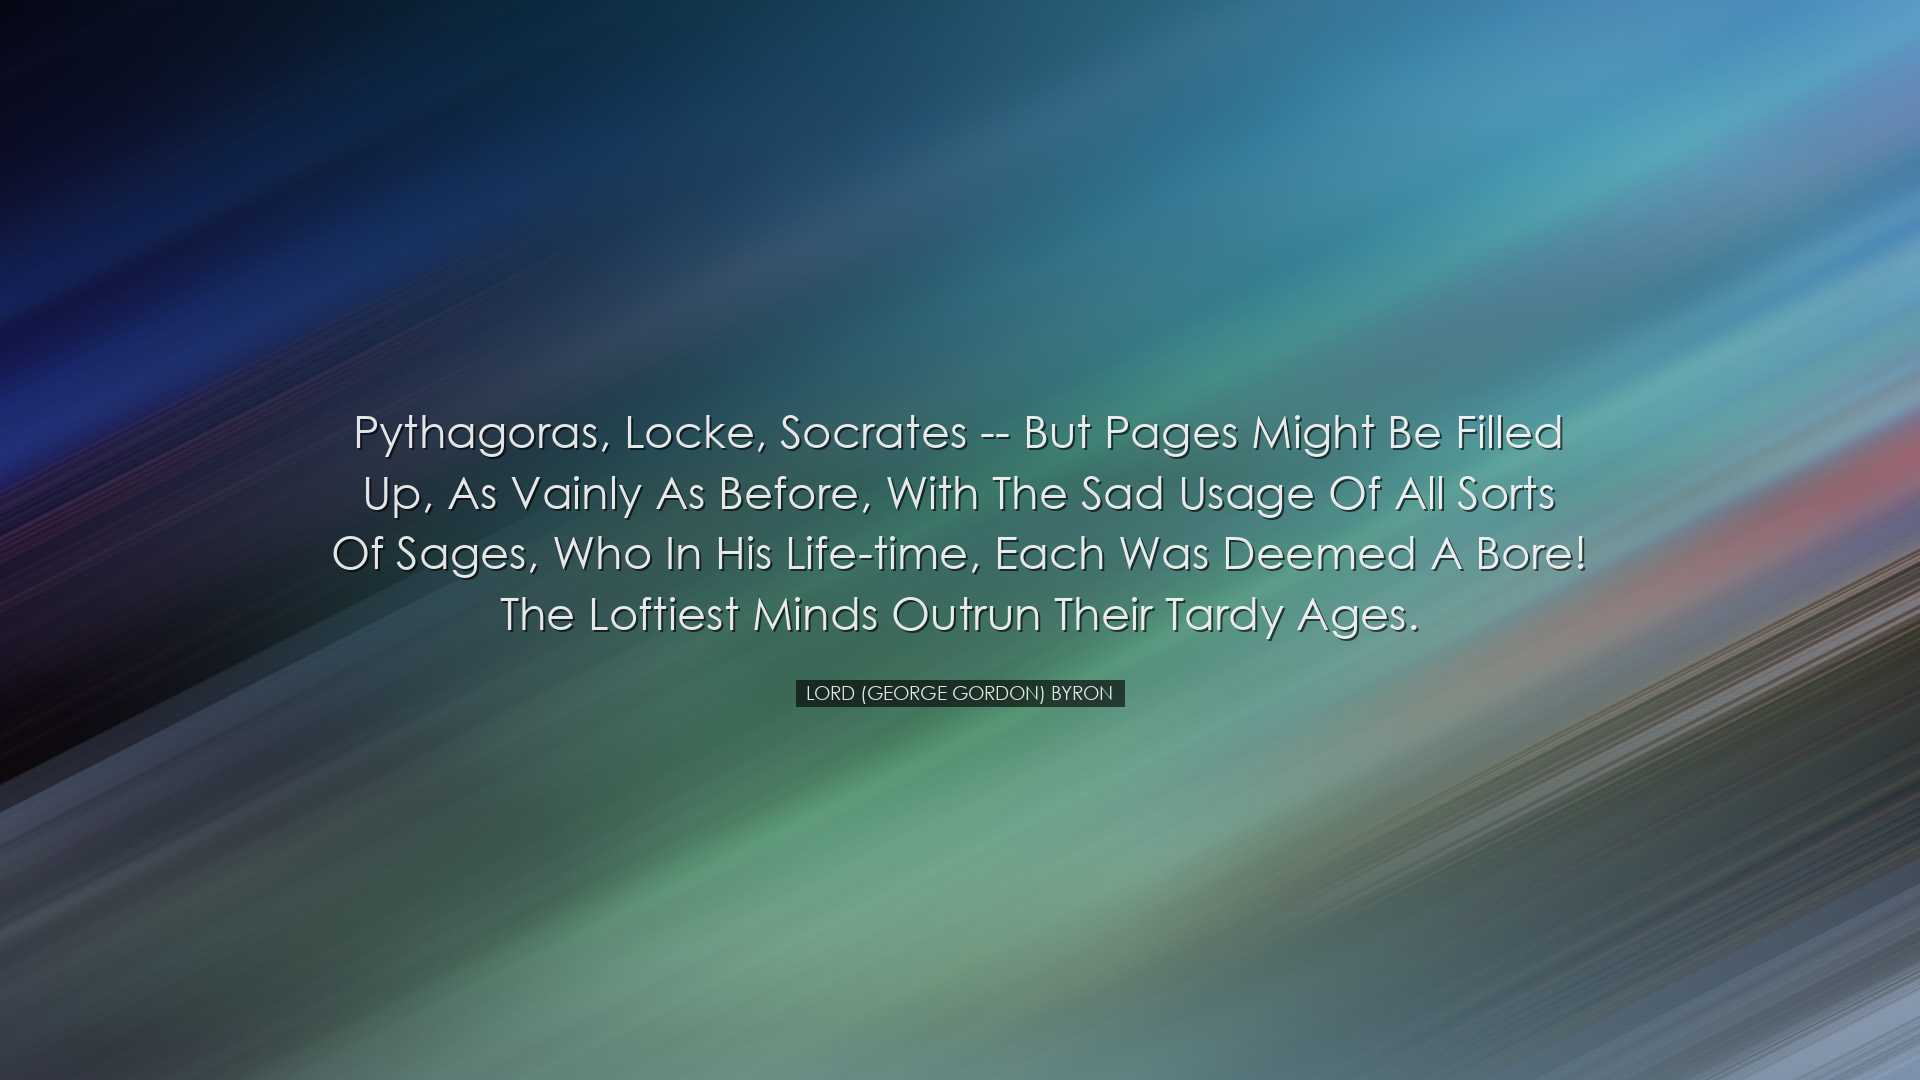 Pythagoras, Locke, Socrates -- but pages might be filled up, as va